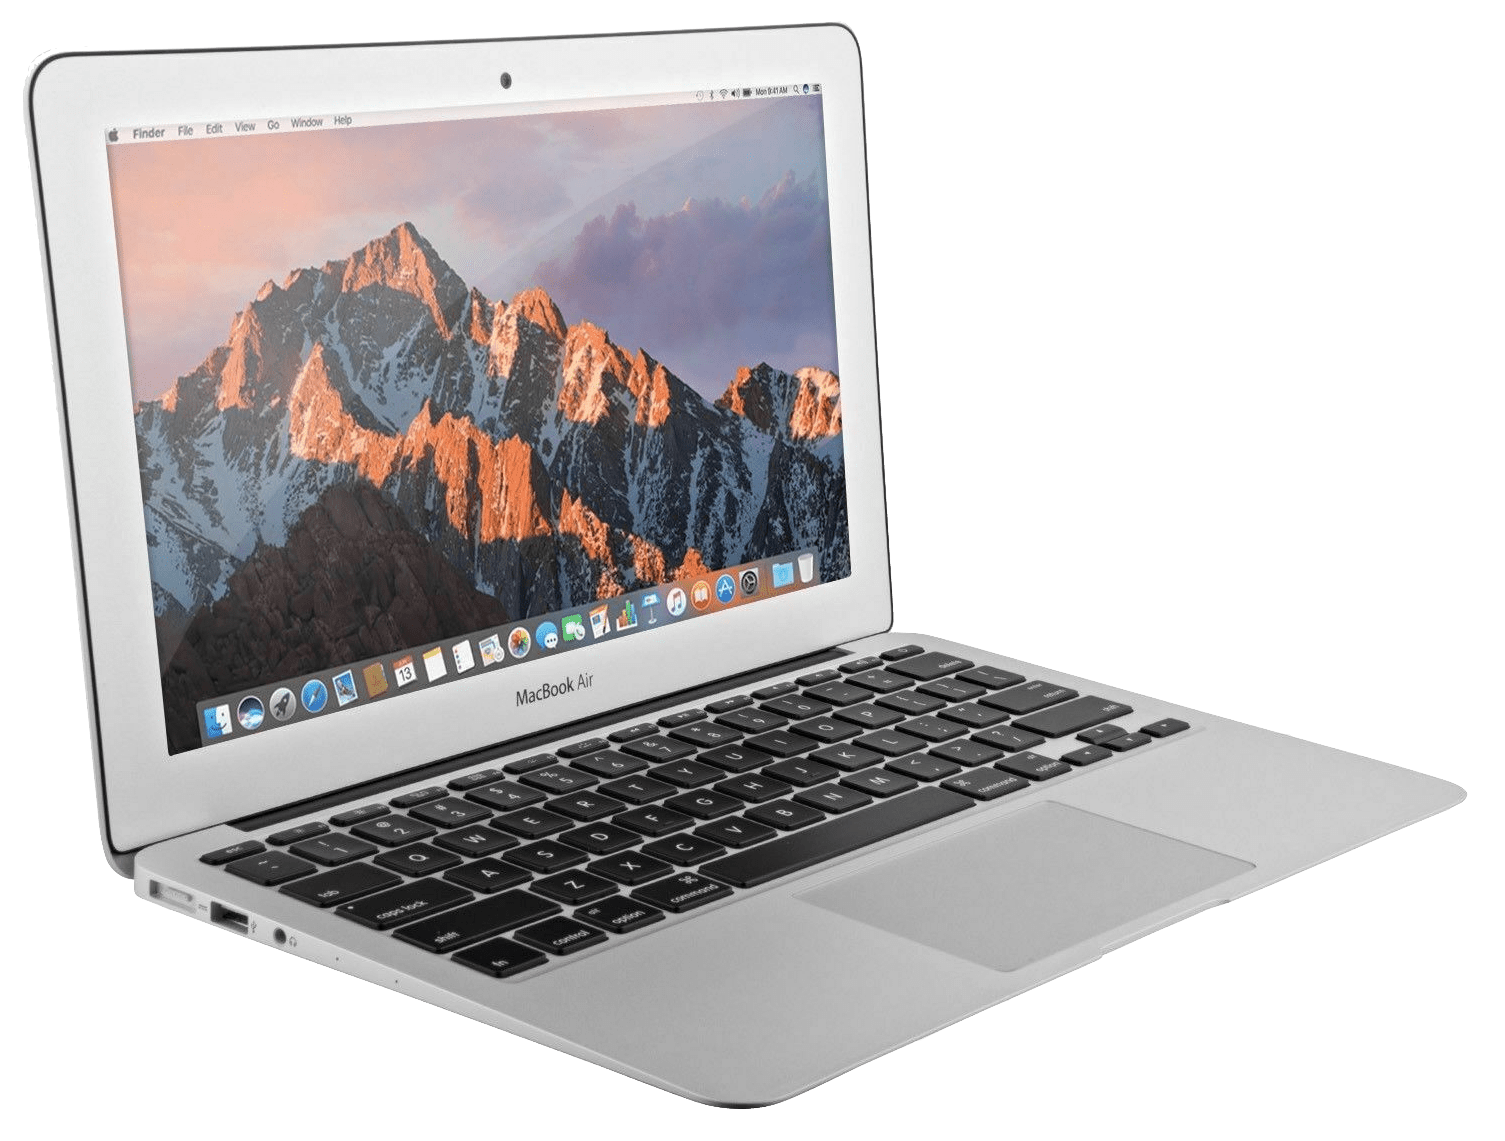 CHEAP: Good lord, this 11″ MacBook Air with a 128GB SSD is only $300